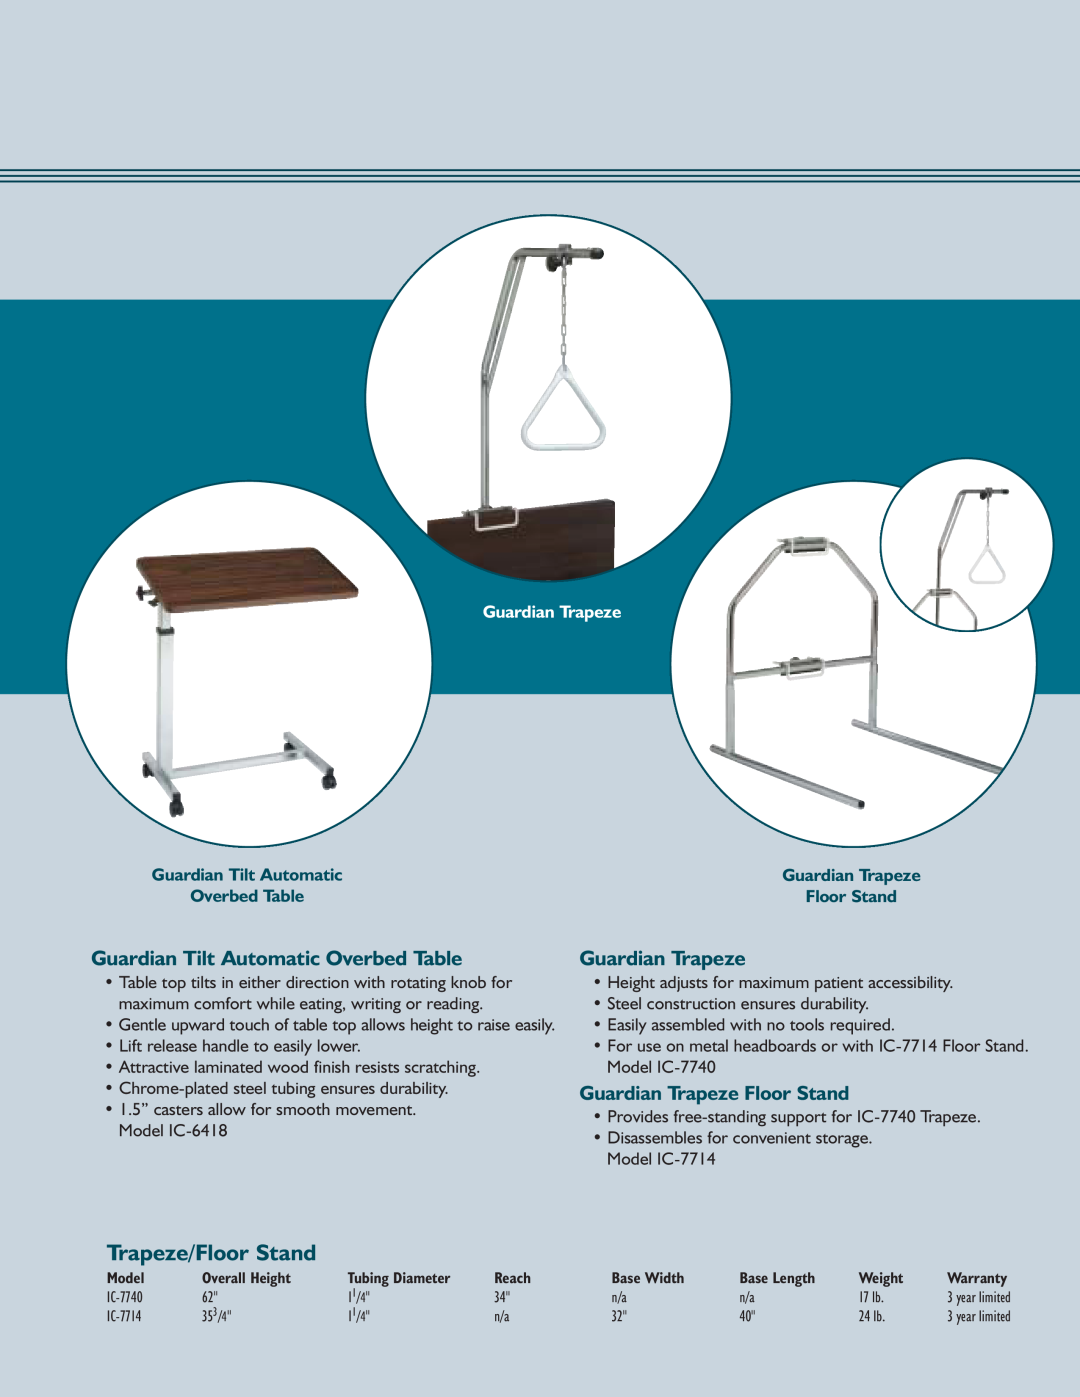 Sunrise Medical IC Series manual Trapeze/Floor Stand, Guardian Tilt Automatic Overbed Table, Guardian Trapeze 